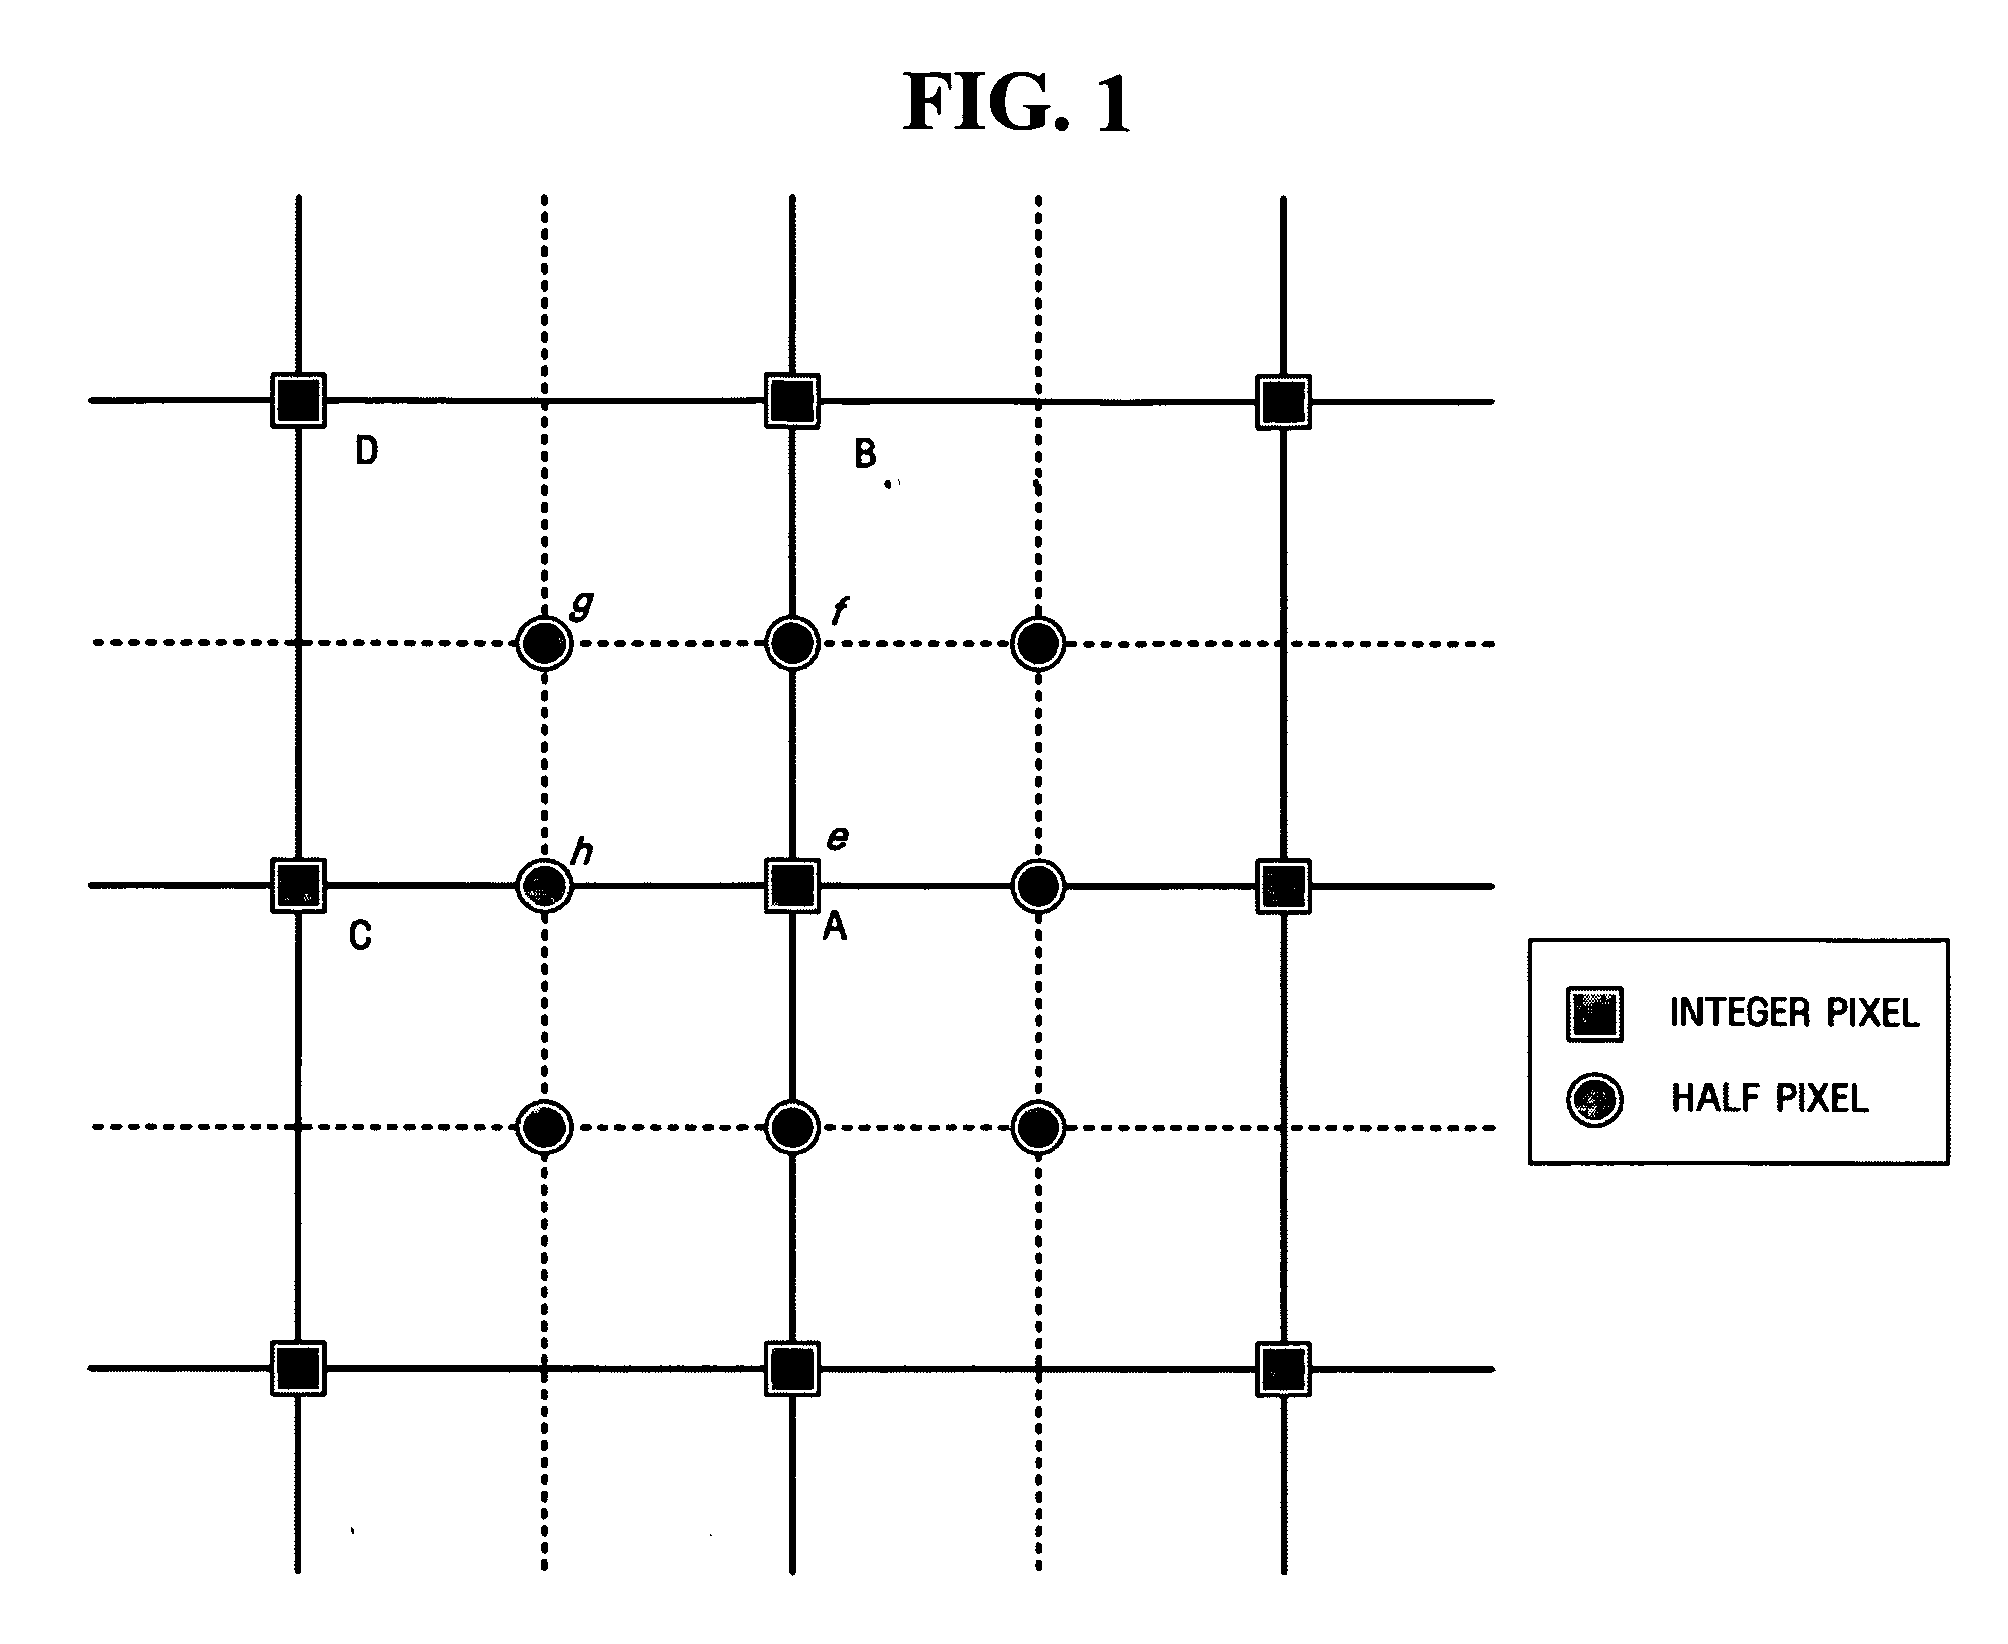 Method and apparatus for encoding video signal with improved compression efficiency using model switching in motion estimation of sub-pixel